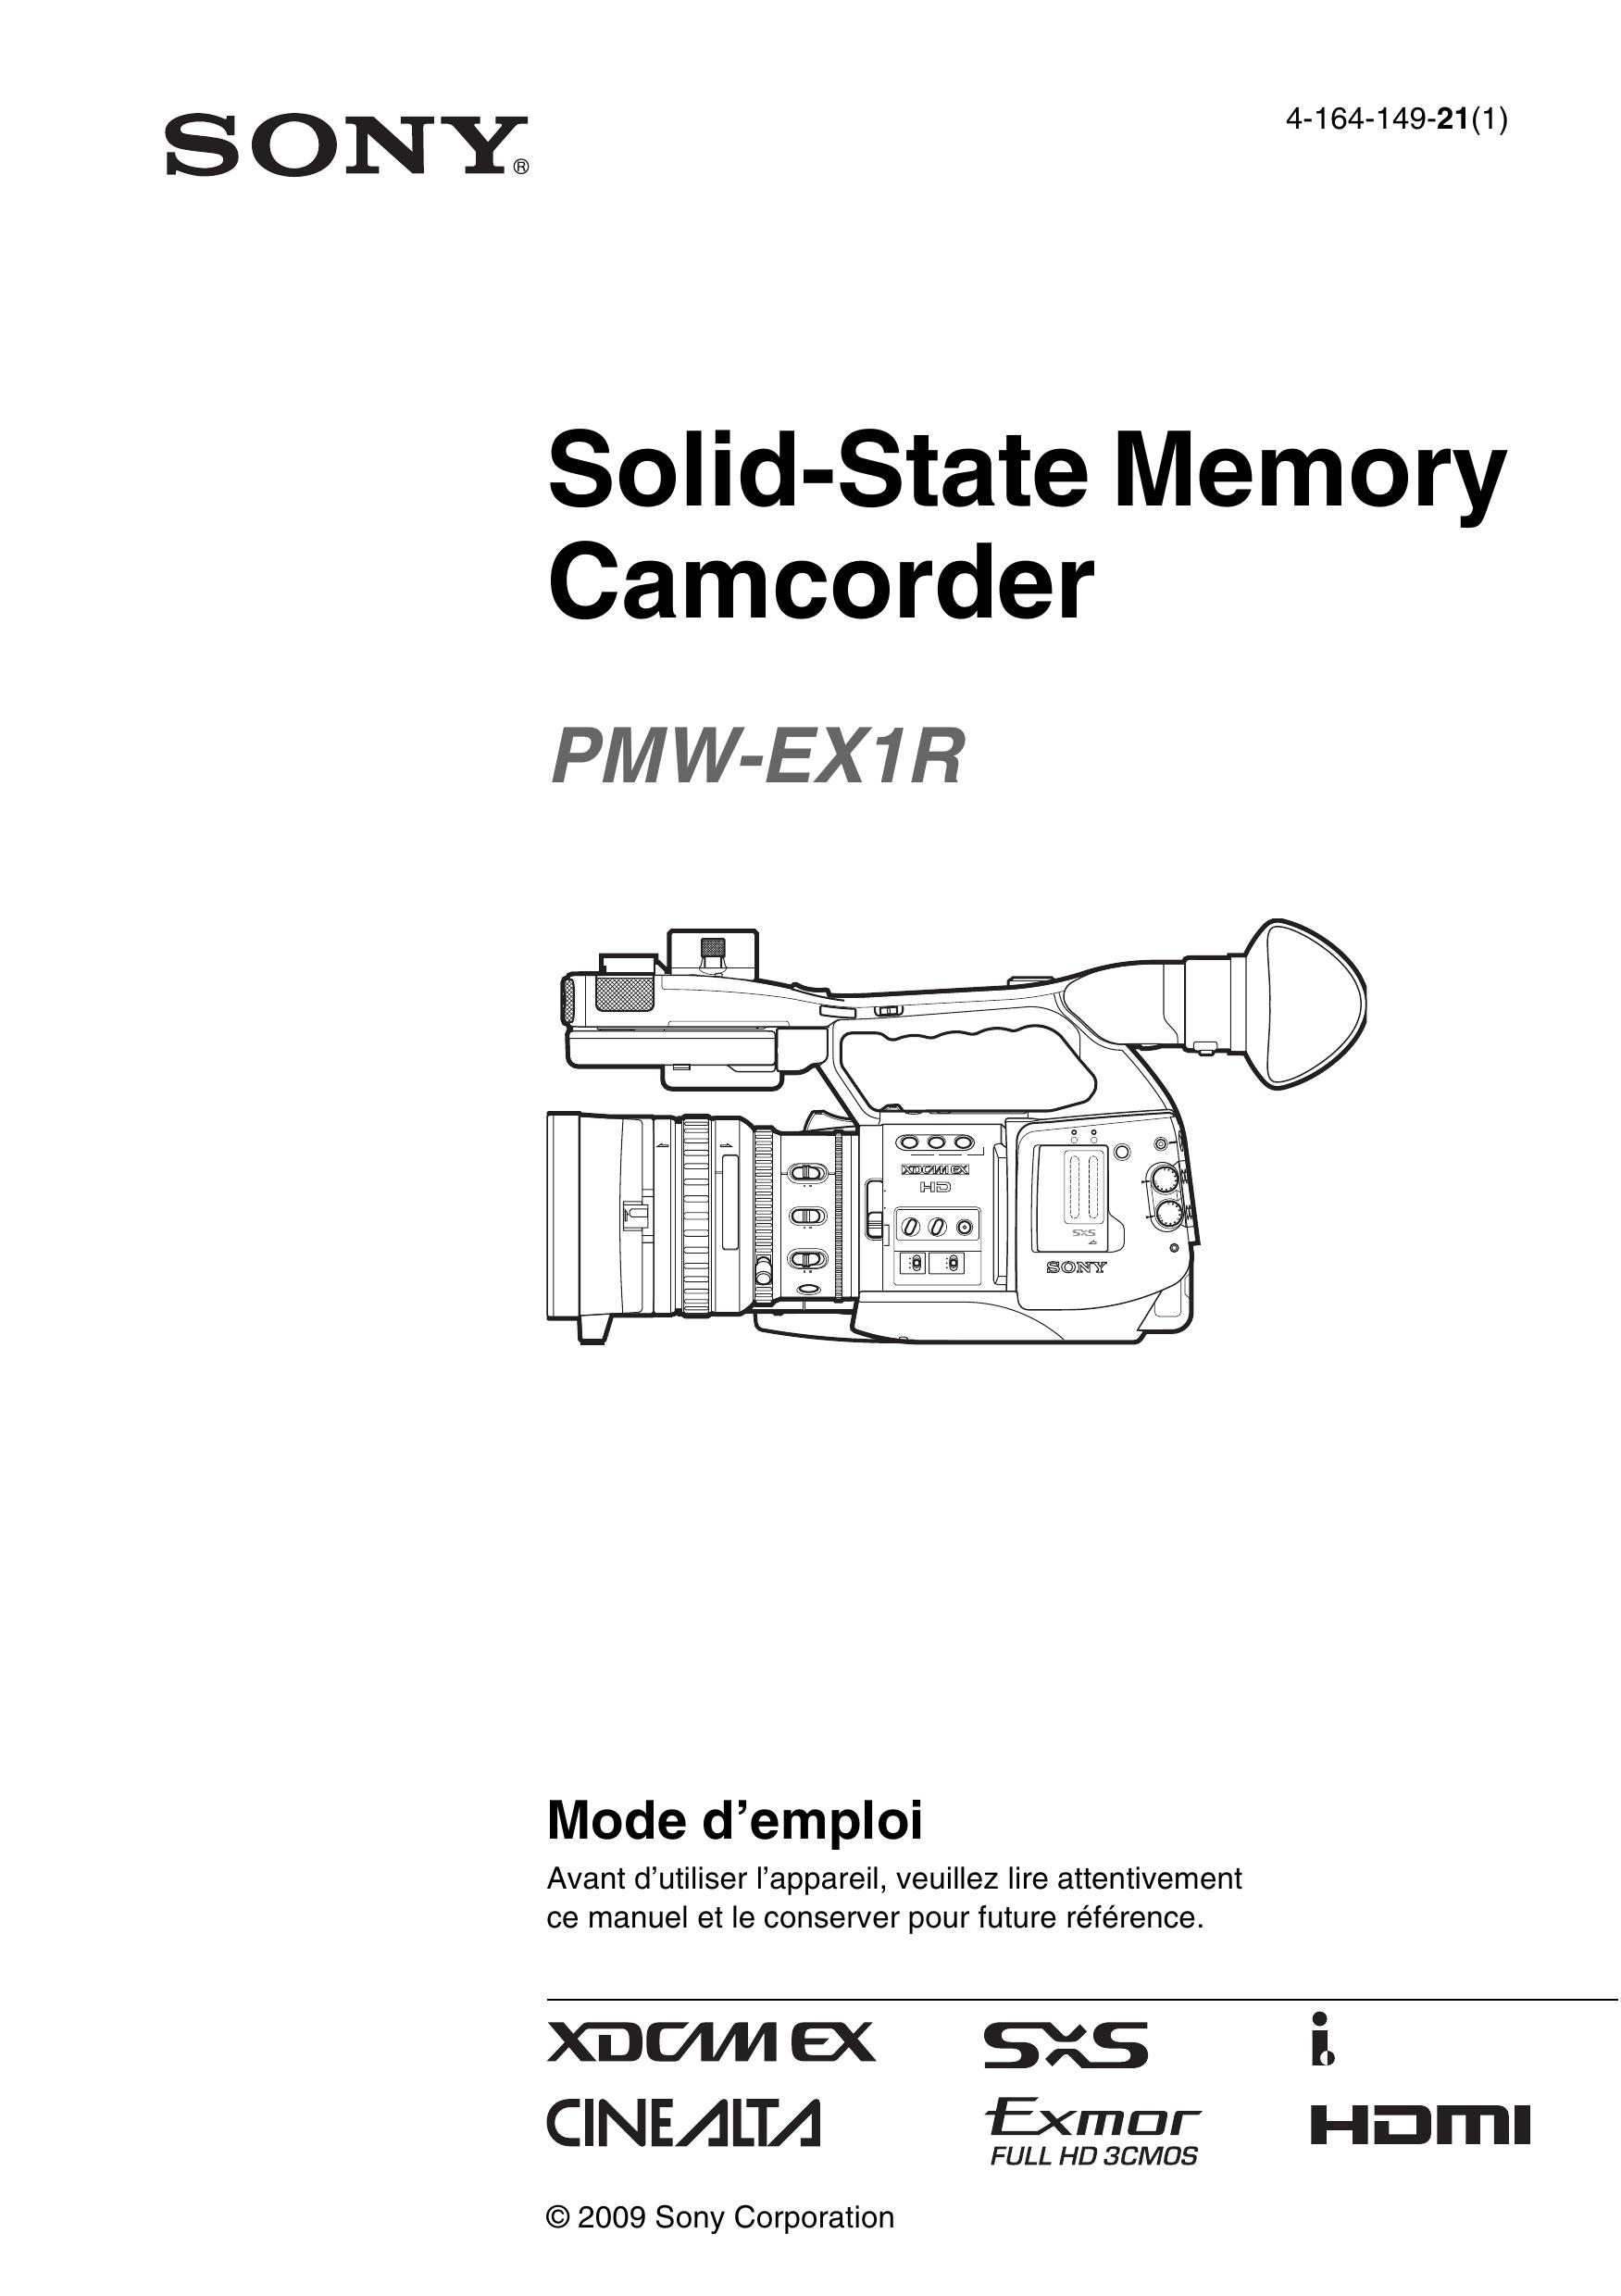 Sony 4-164-149-21(1) Camcorder User Manual